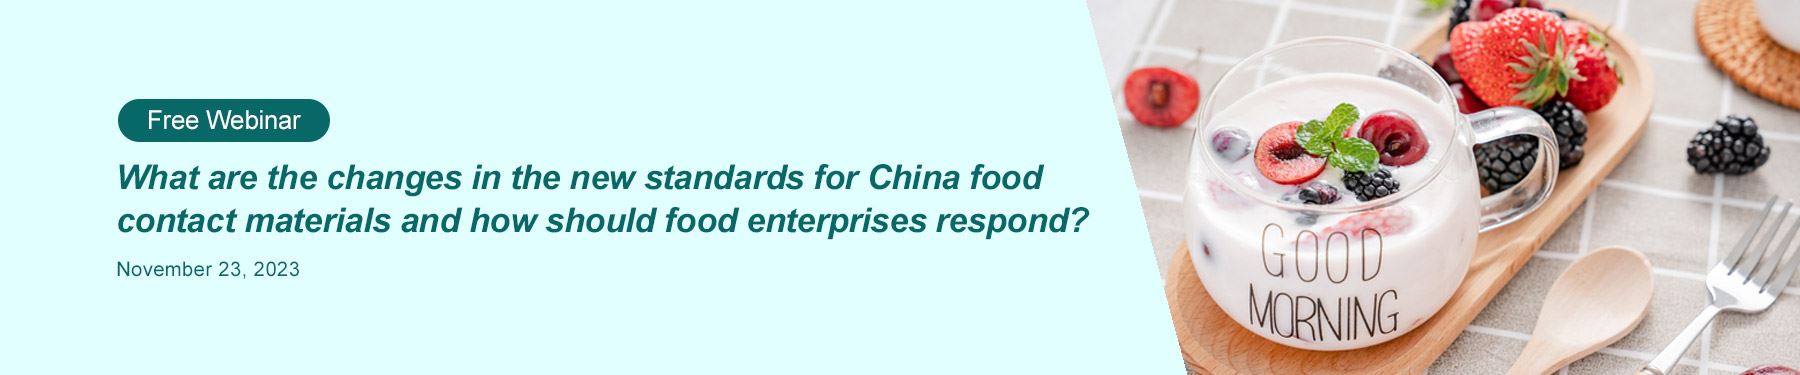 https://www.hfoushi.com/en/food/cirs-free-webinar-what-are-the-changes-in-the-new-standards-for-china-food-contact-materials-and-how-should-food-enterprises-respond